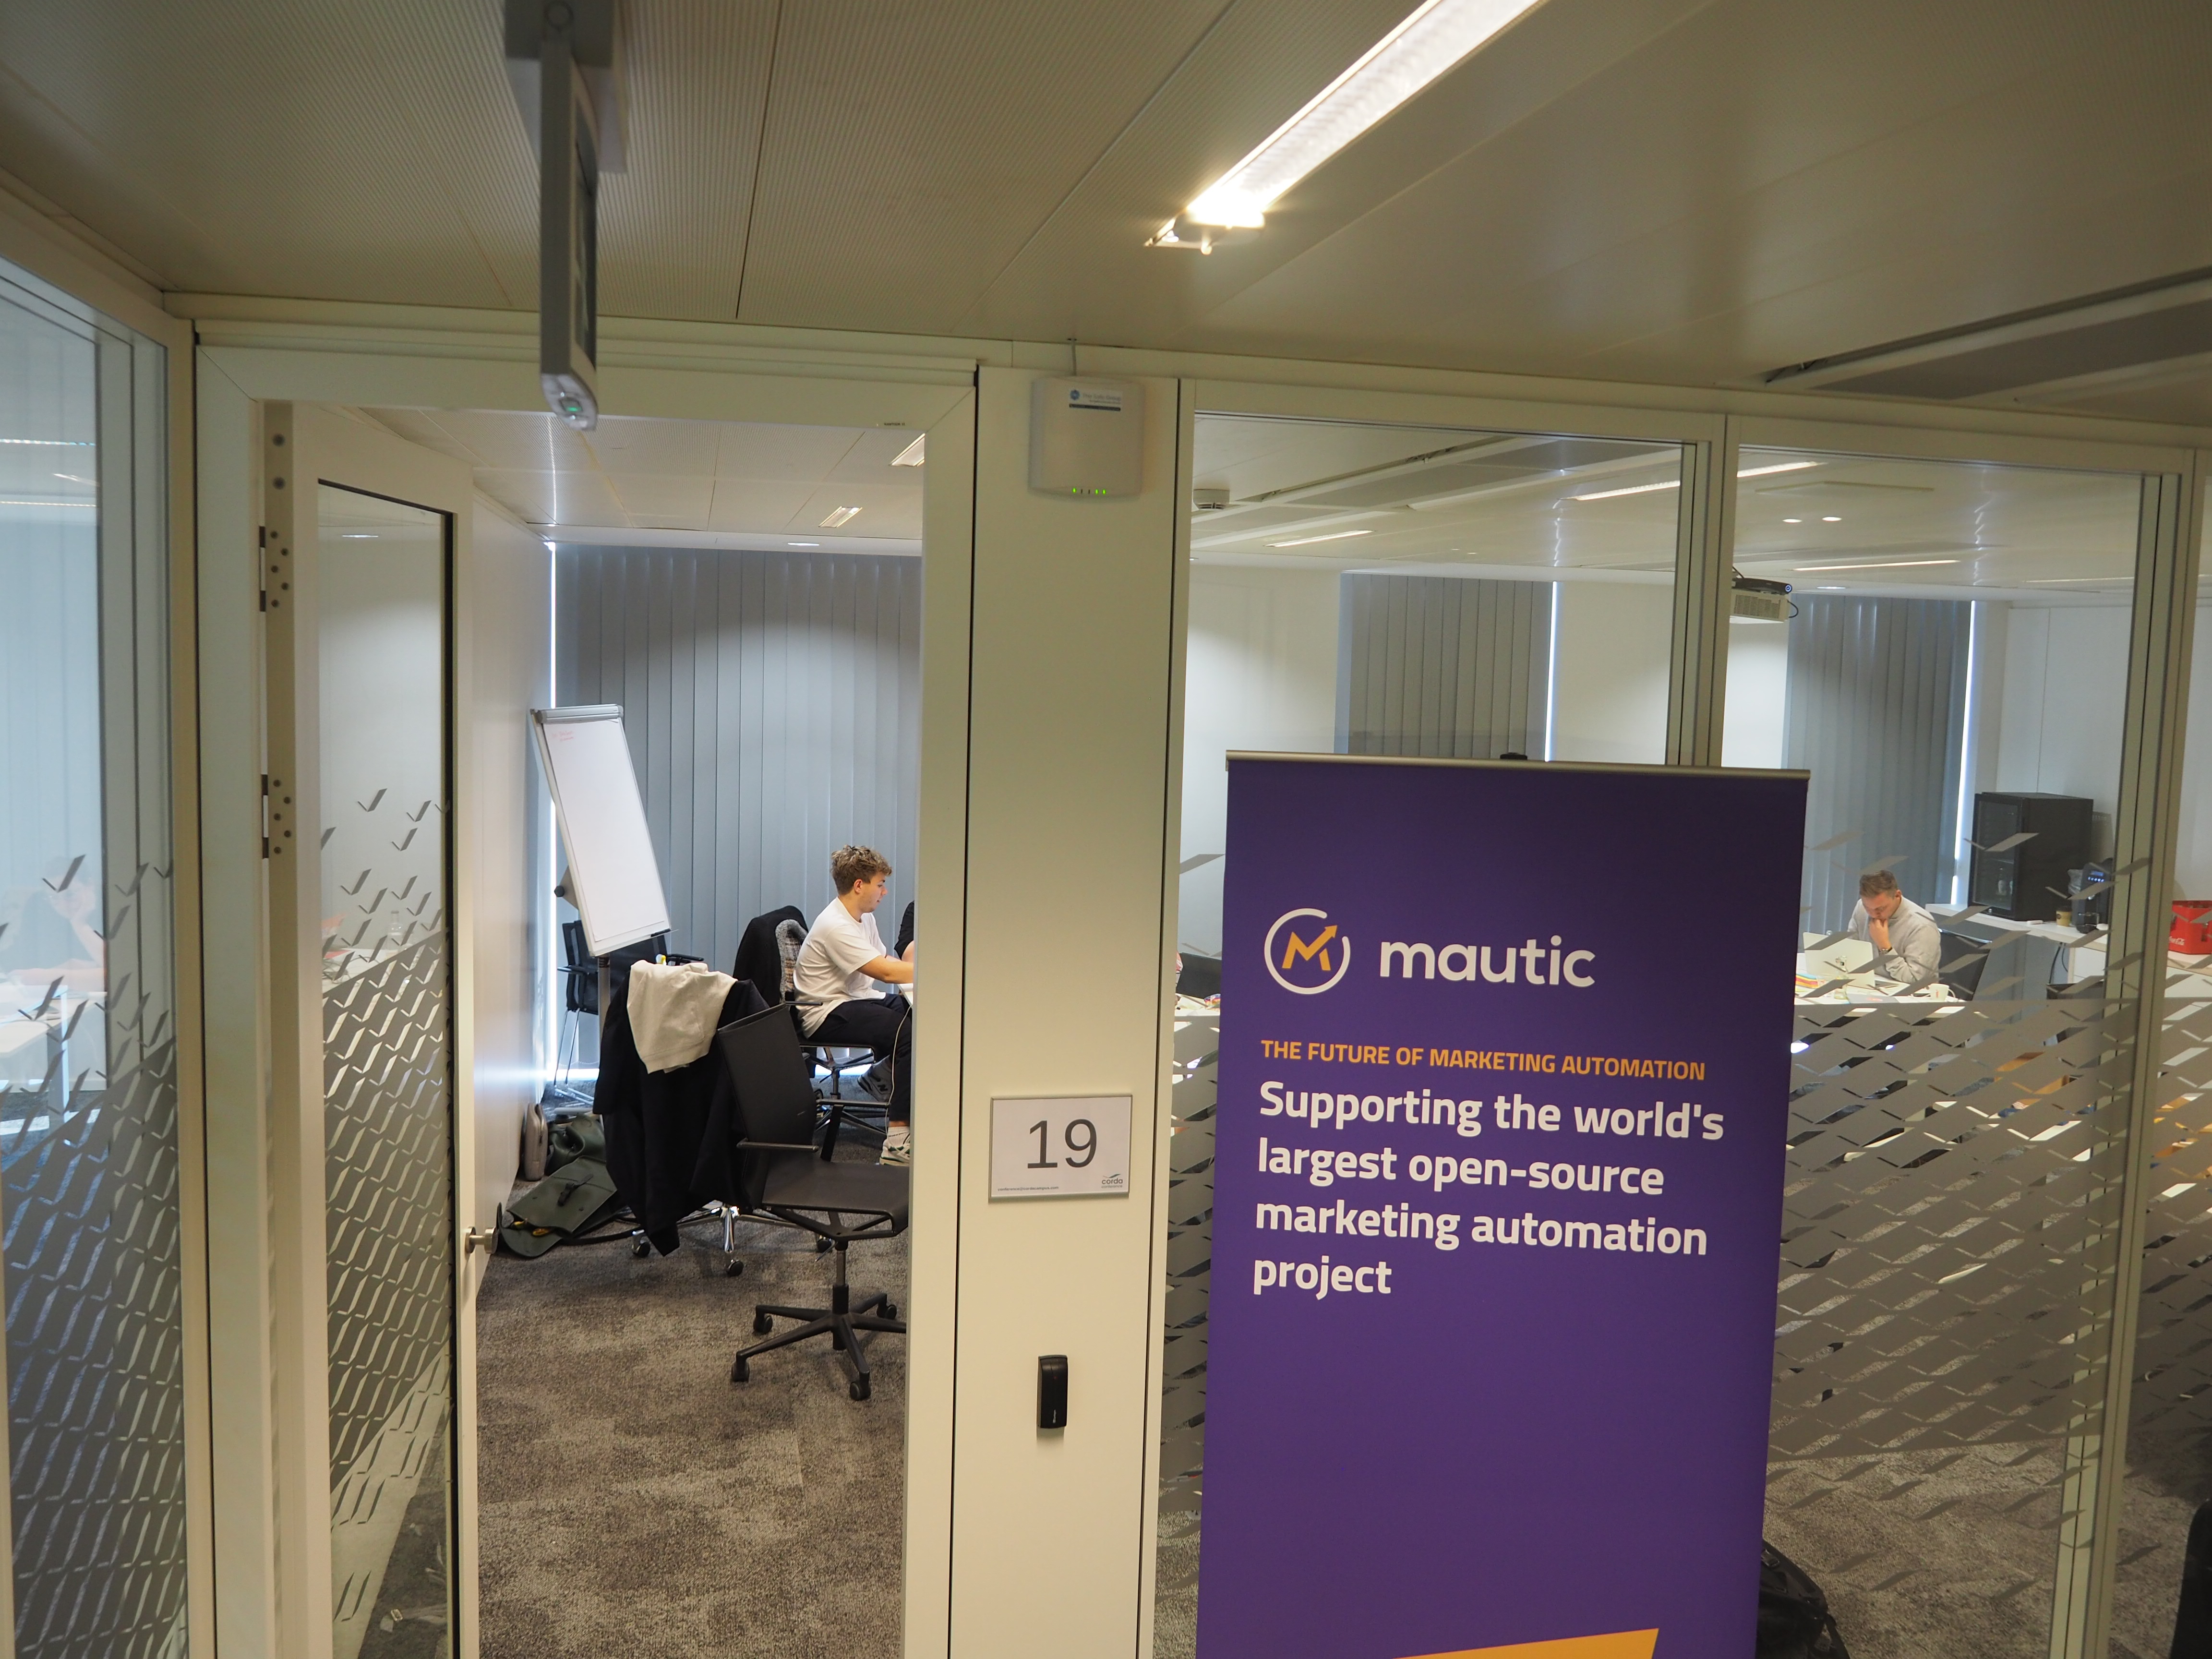 Looking into one of the community sprint rooms with a Mautic popup banner outside